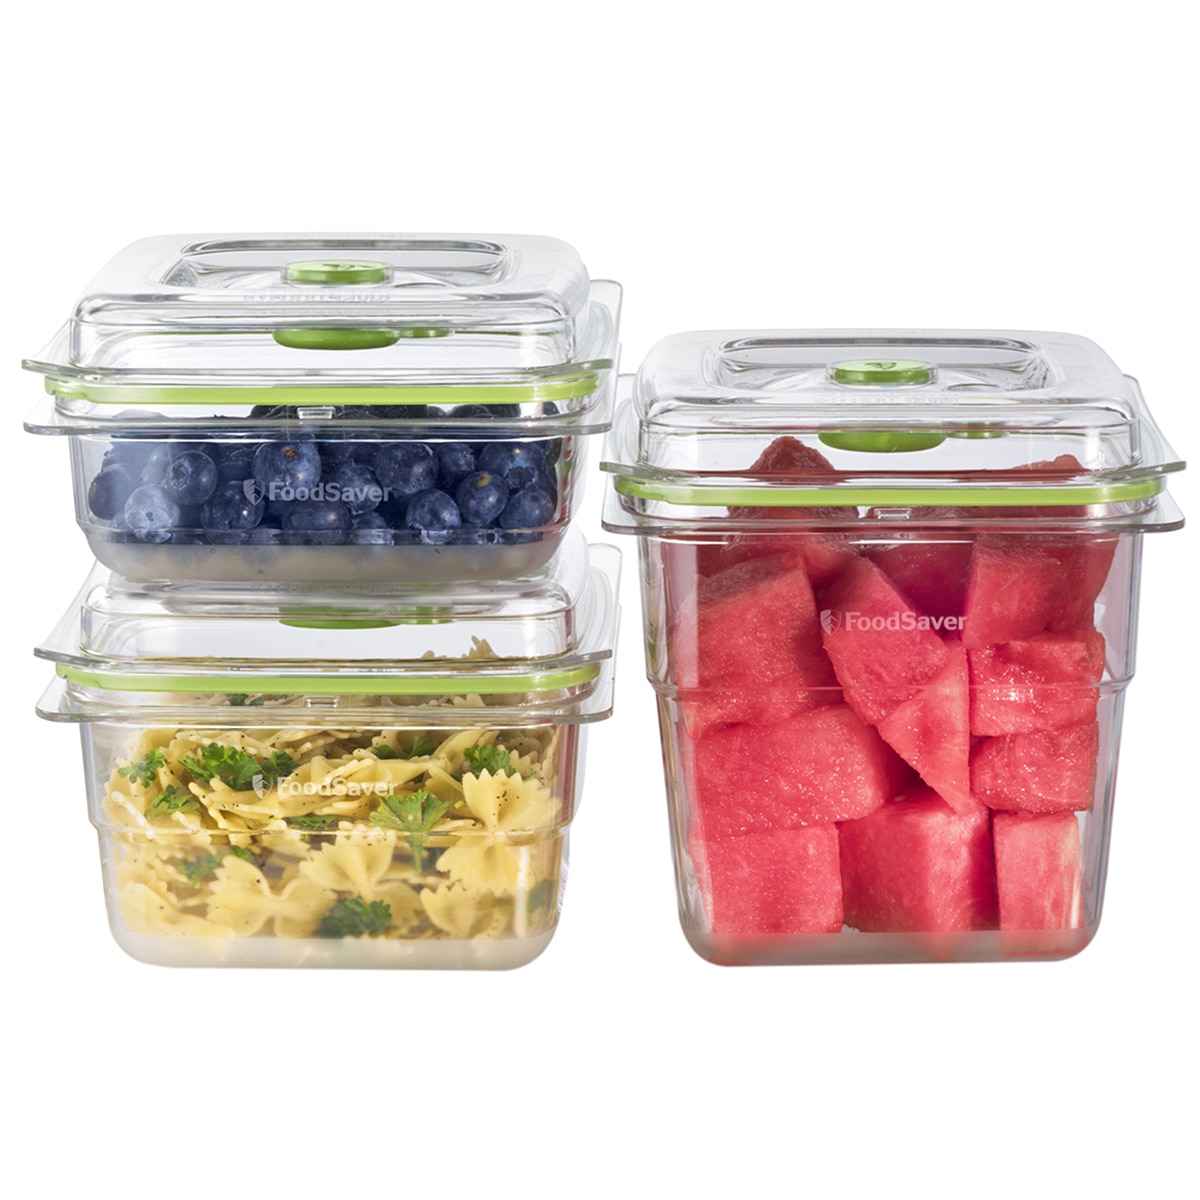 Sunbeam FoodSaver 3 x Containers VS0655 (3/5/8 cups)